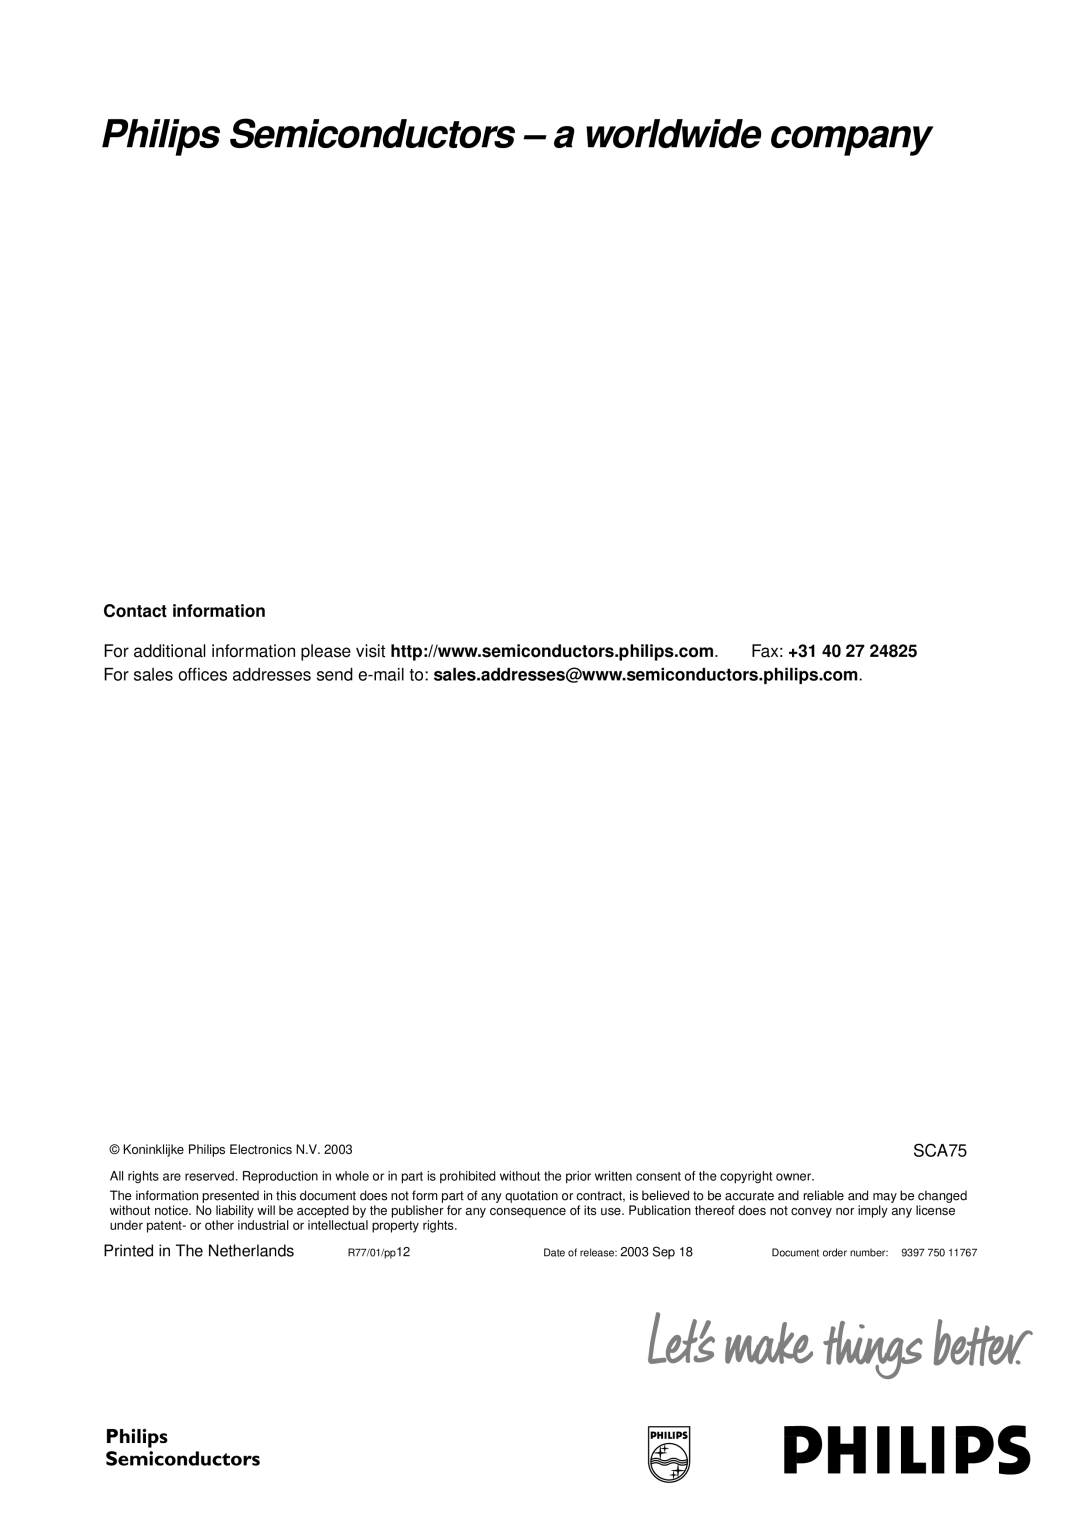 Philips BGA6489 manual Philips Semiconductors - a worldwide company, Contact information, Fax +31 40 